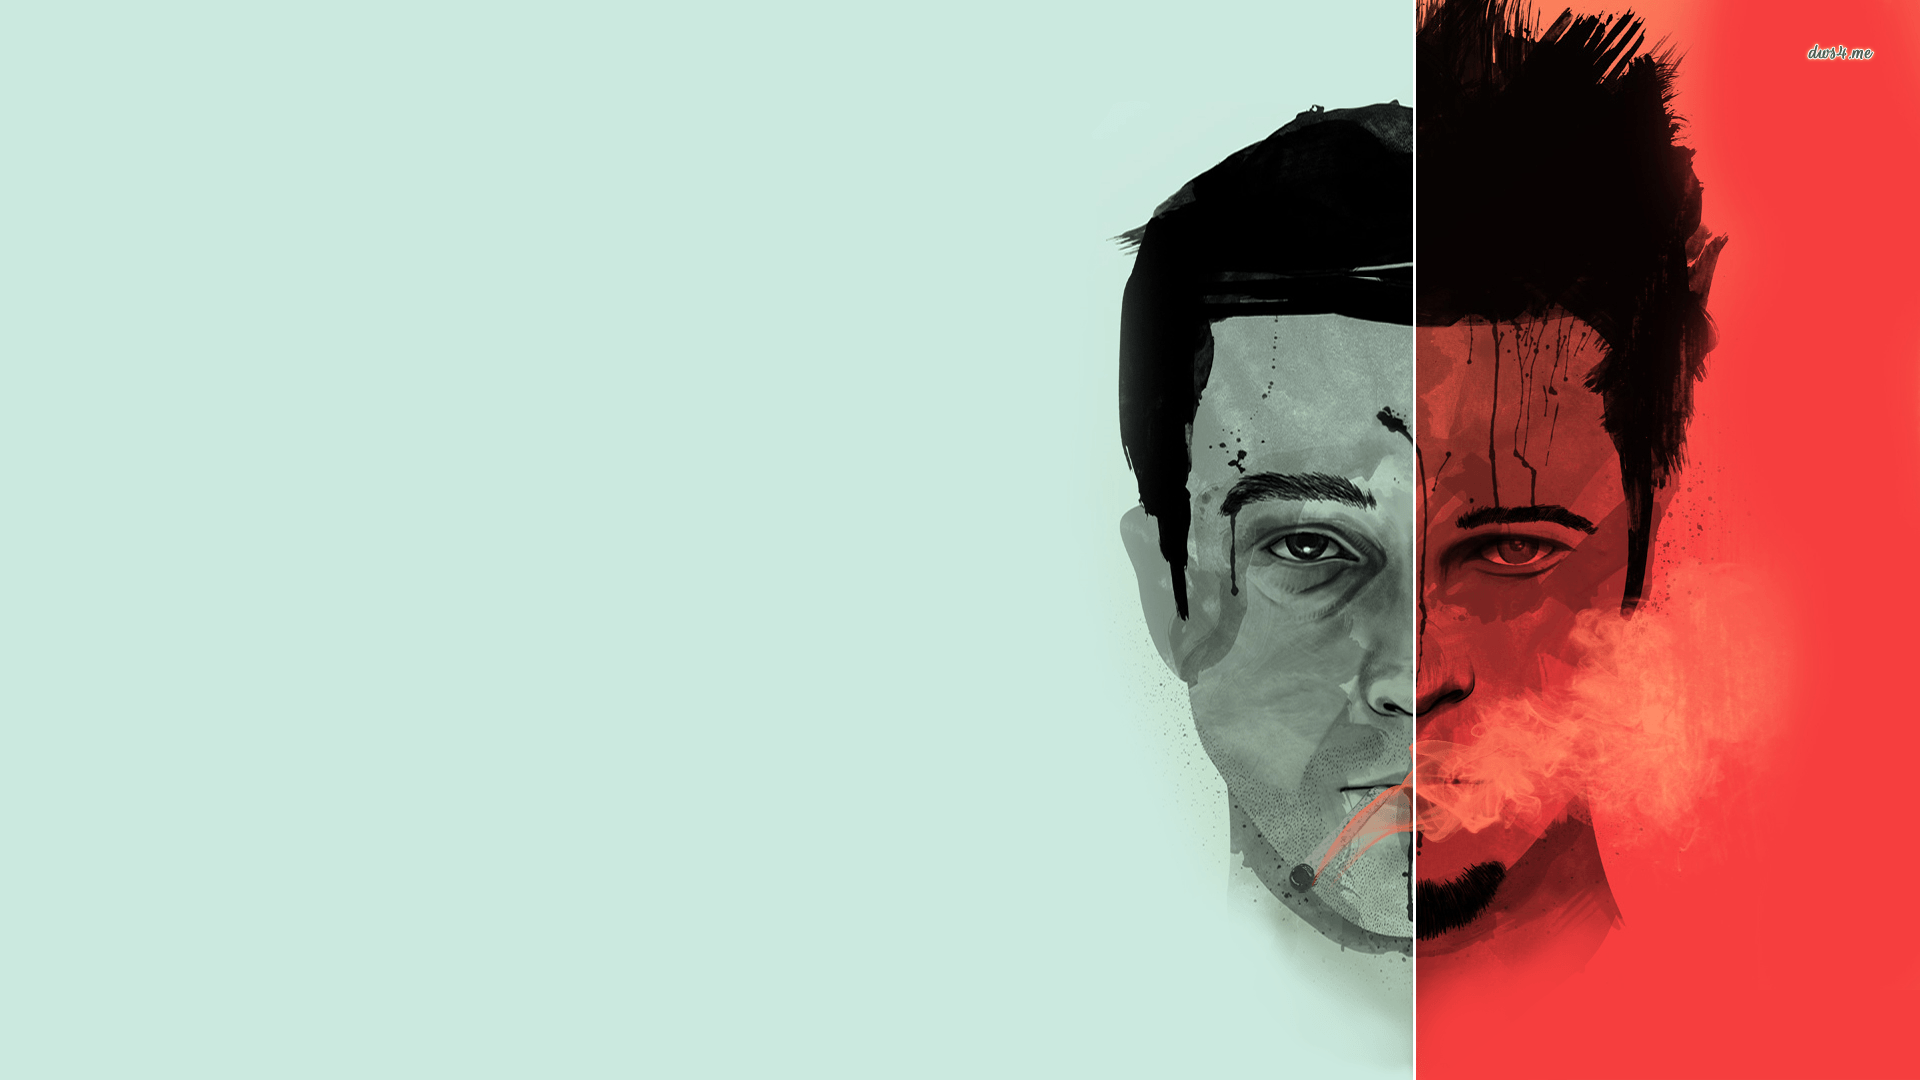 Tyler durden and the narrator fight club wallpaper. Graphic design